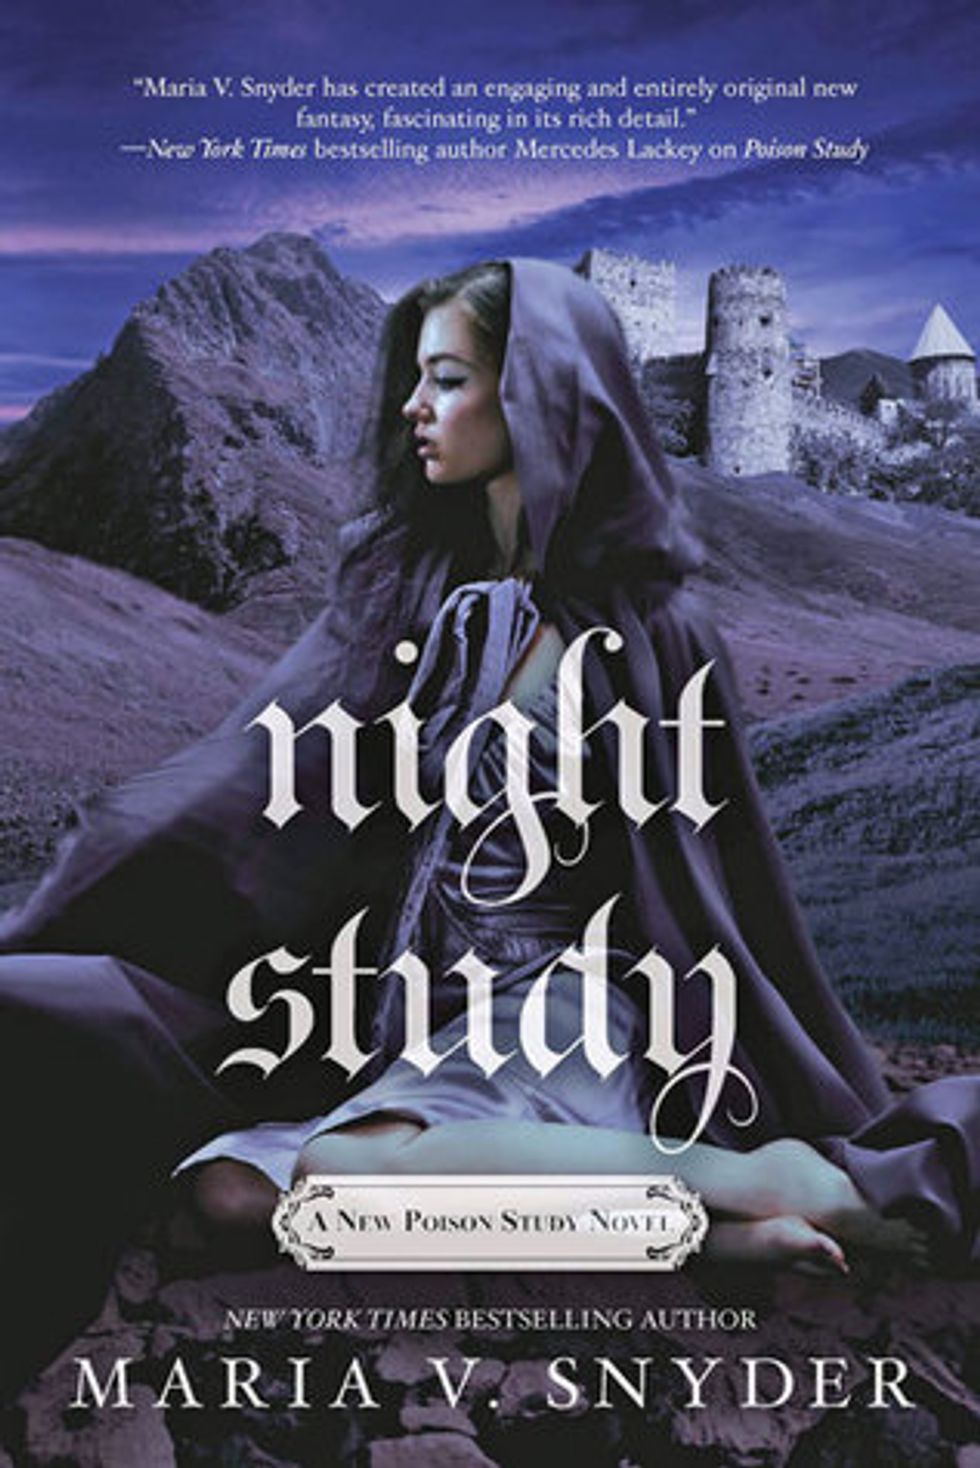 Review of Night Study by Maria V. Snyder